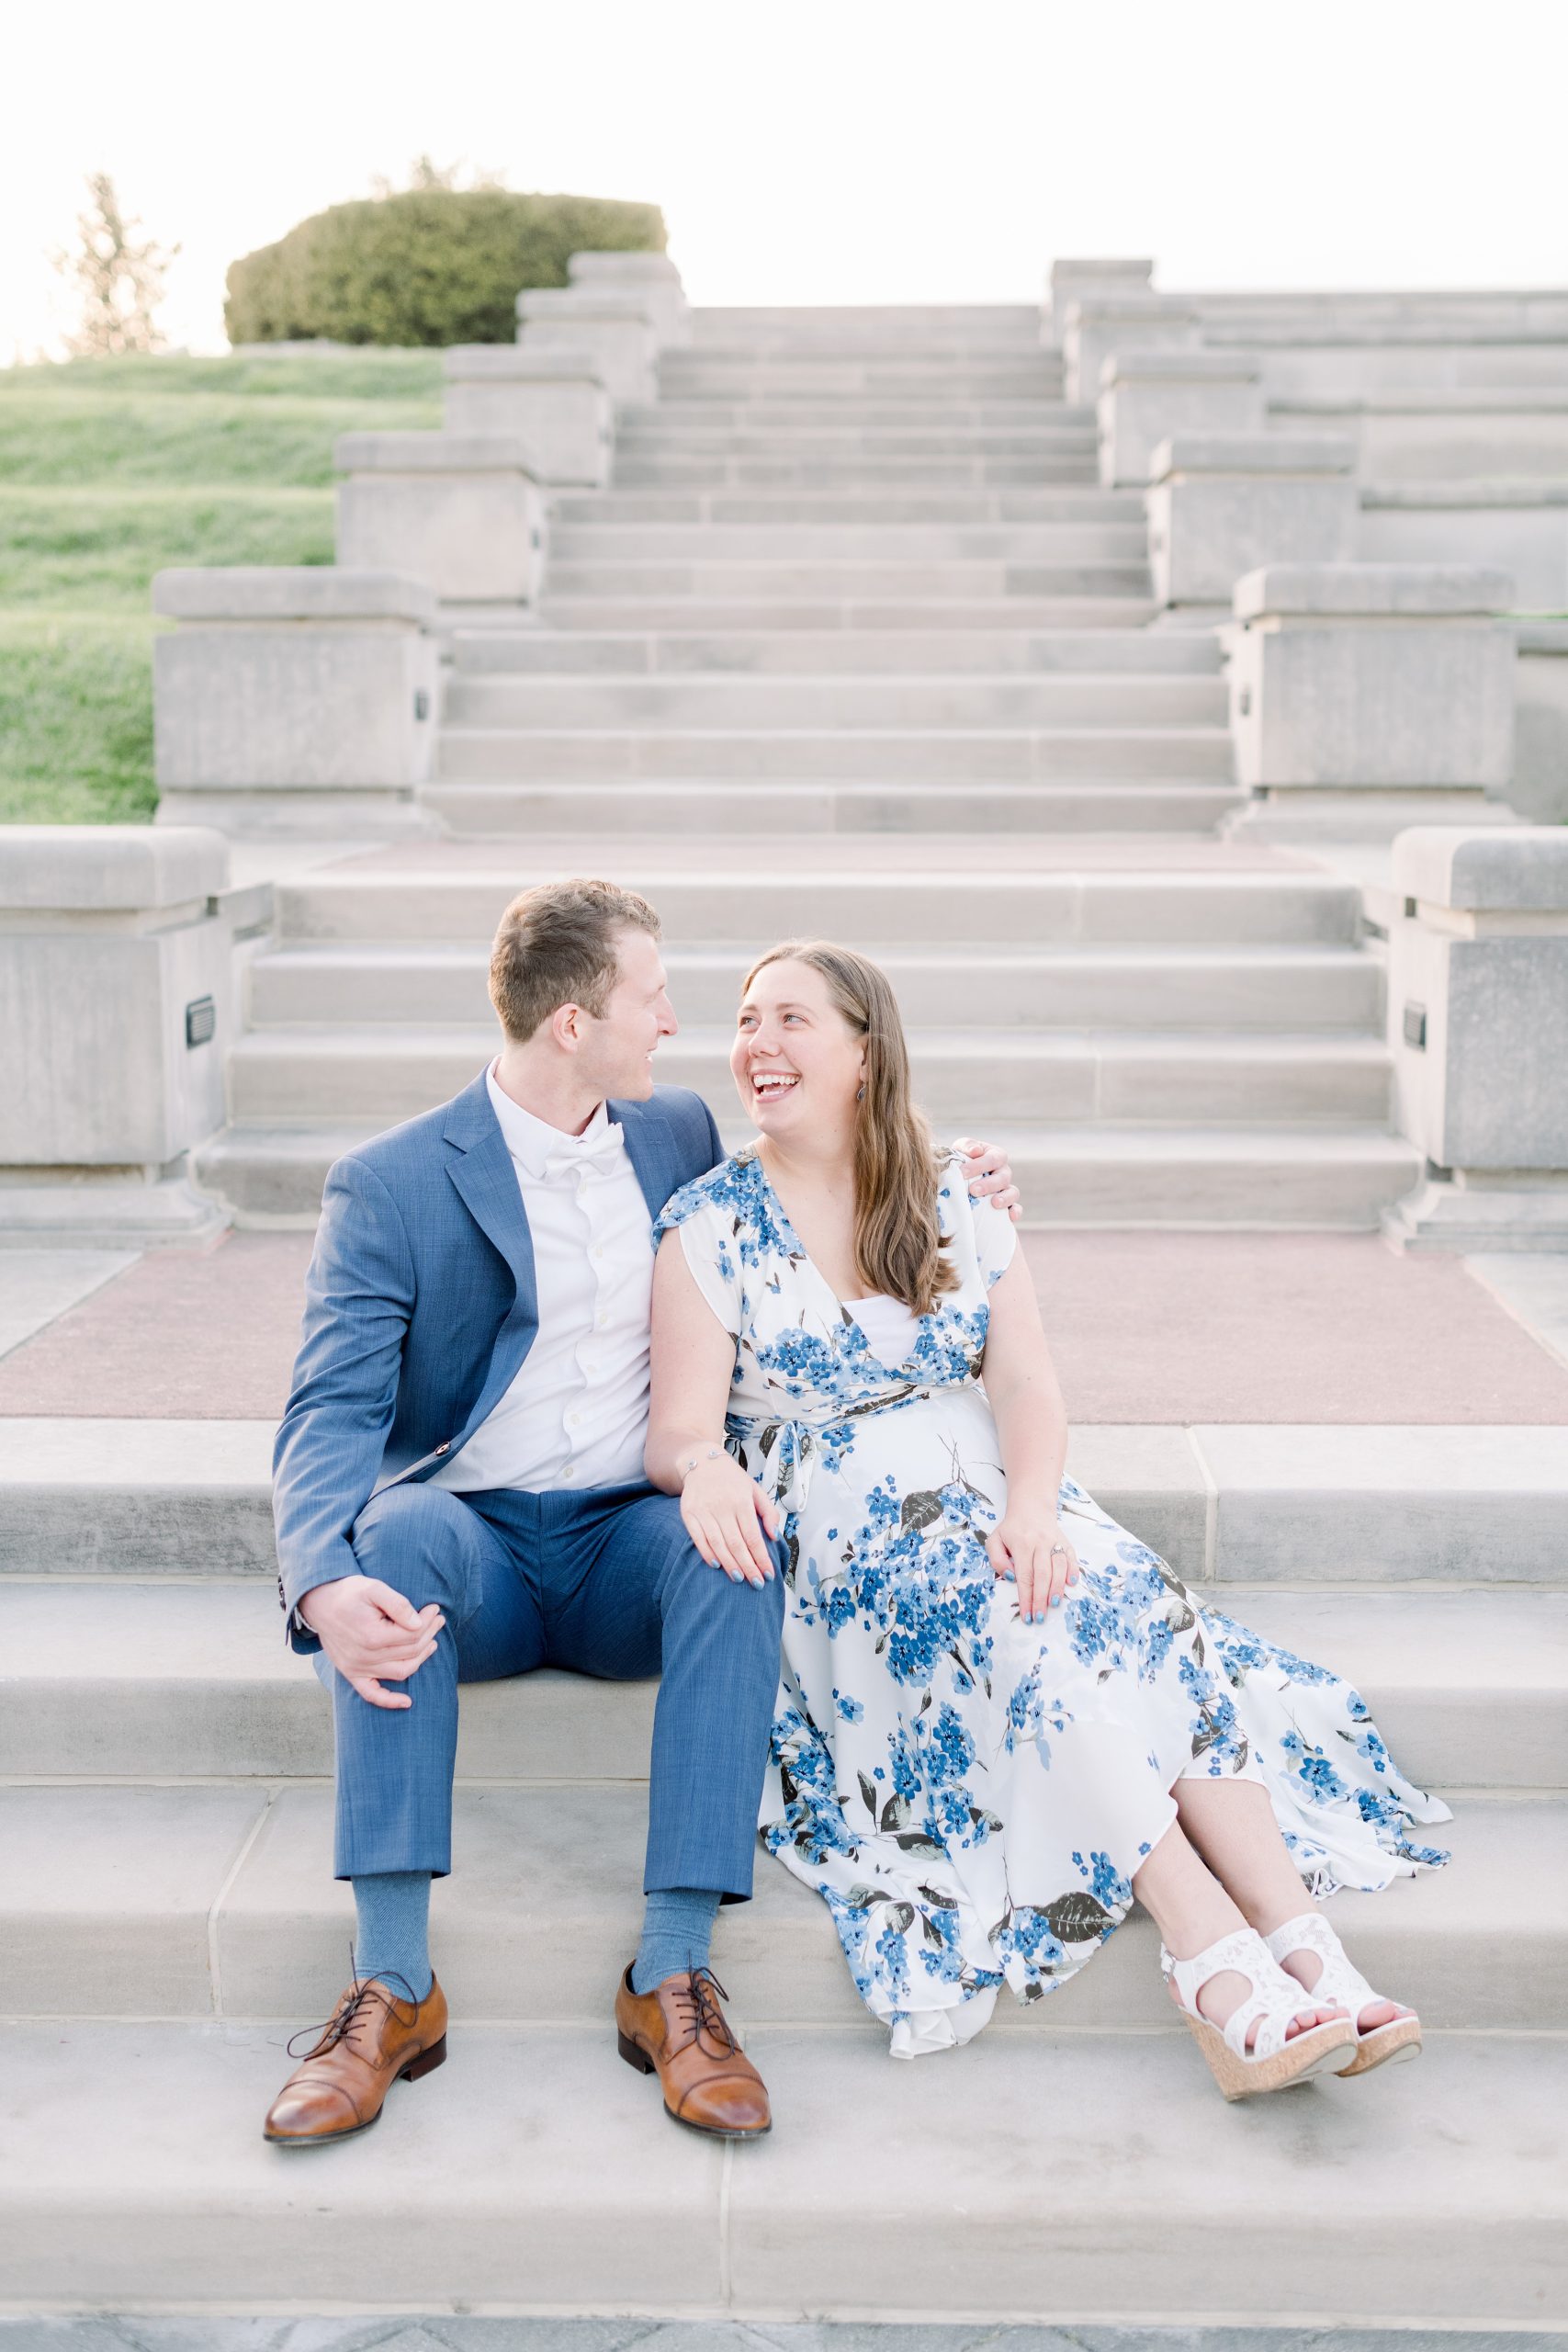 Couple share a smile on the steps during engagement session at Coxhall Gardens in Carmel, Indiana